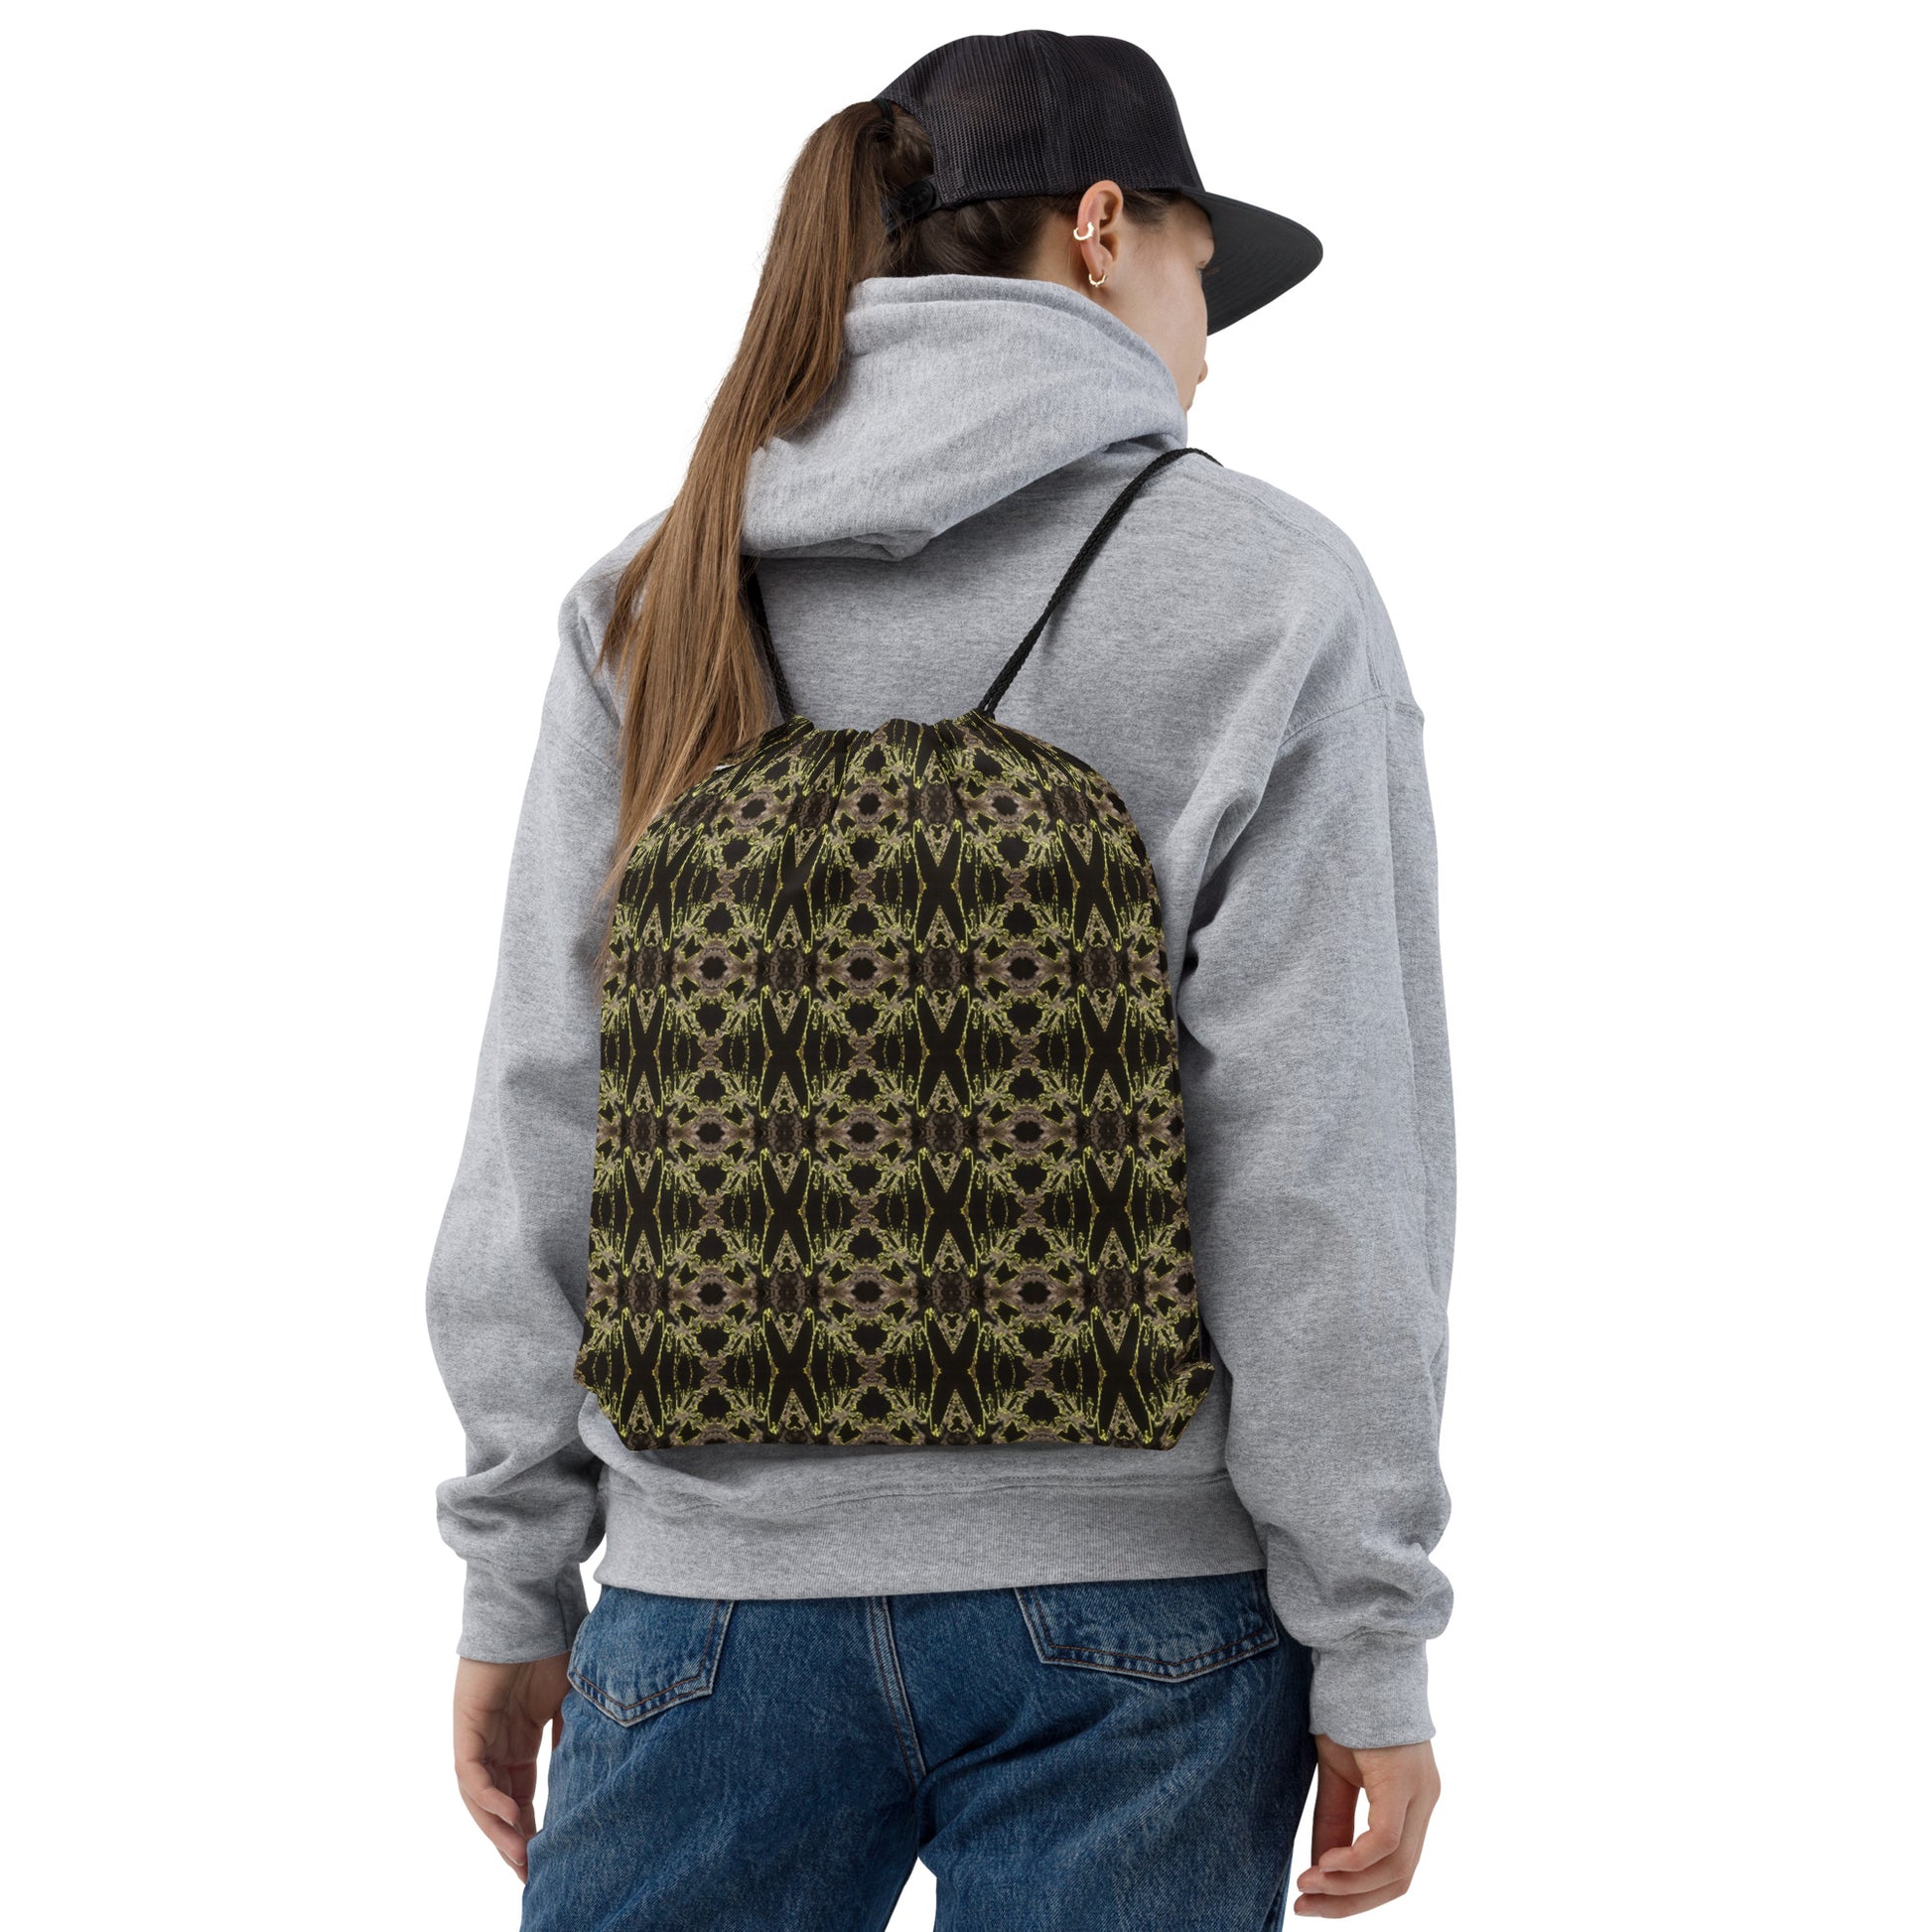 Abstract Drawstring Bag - O By Onica Online Store